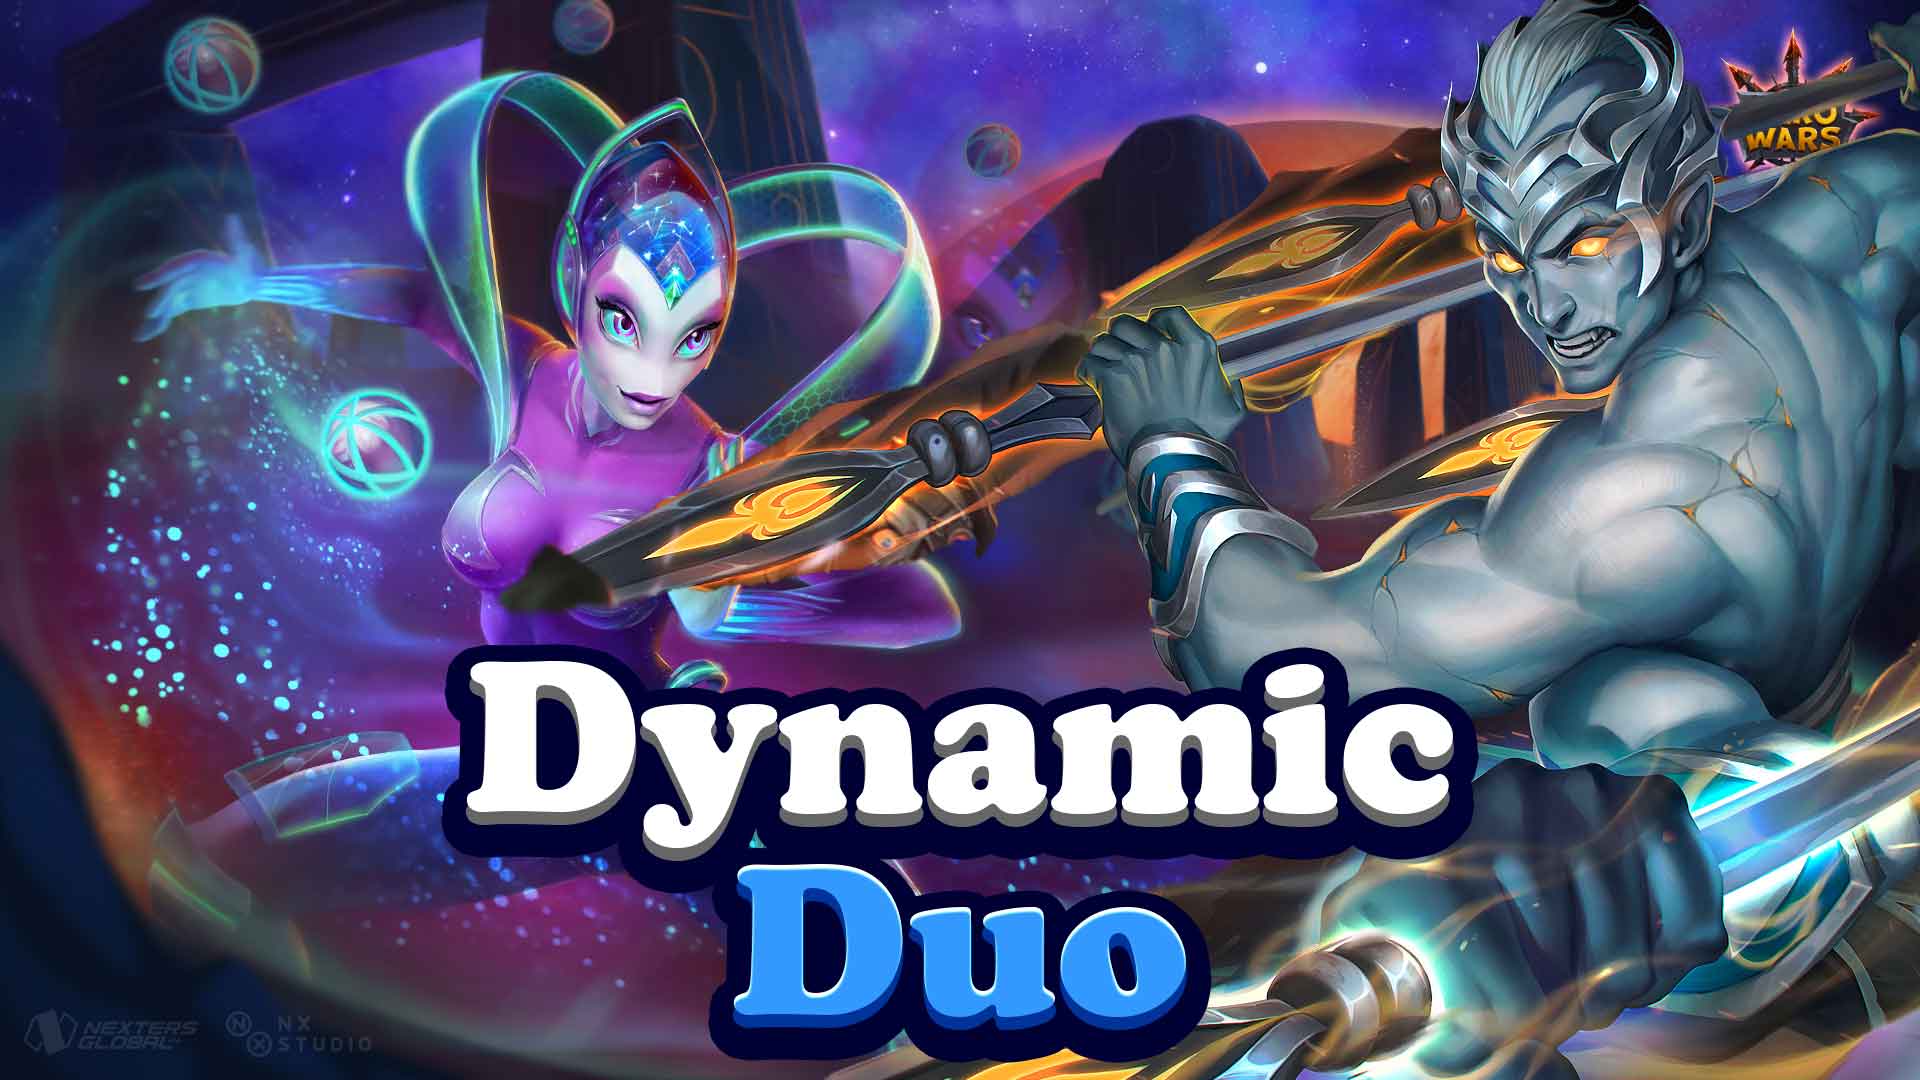 You are currently viewing Hero Wars Dante and Nebula’s Dynamic Duo